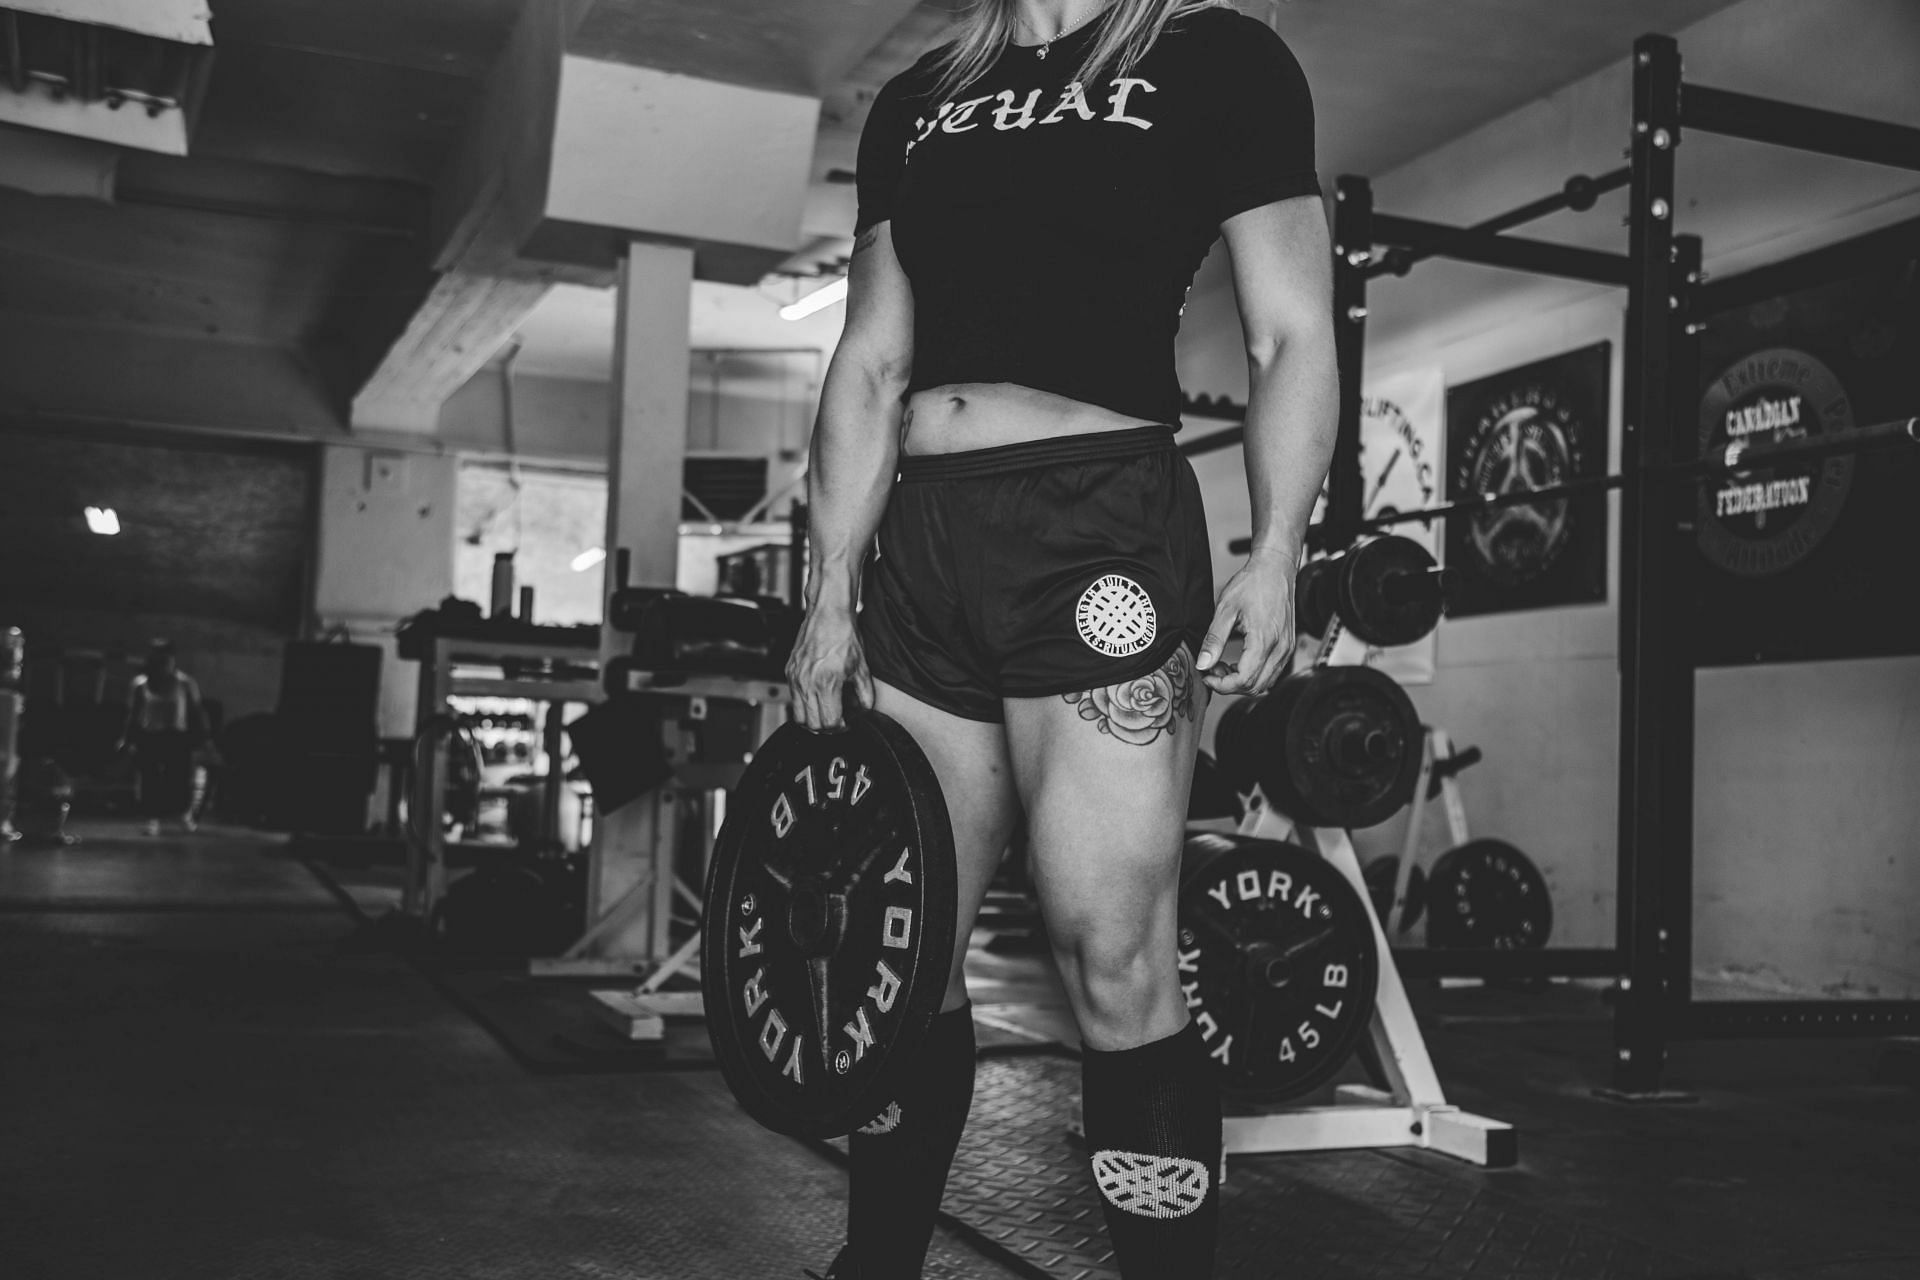 Upgrade the leg day with quad exercises (Photo by Alora Griffiths on Unsplash)